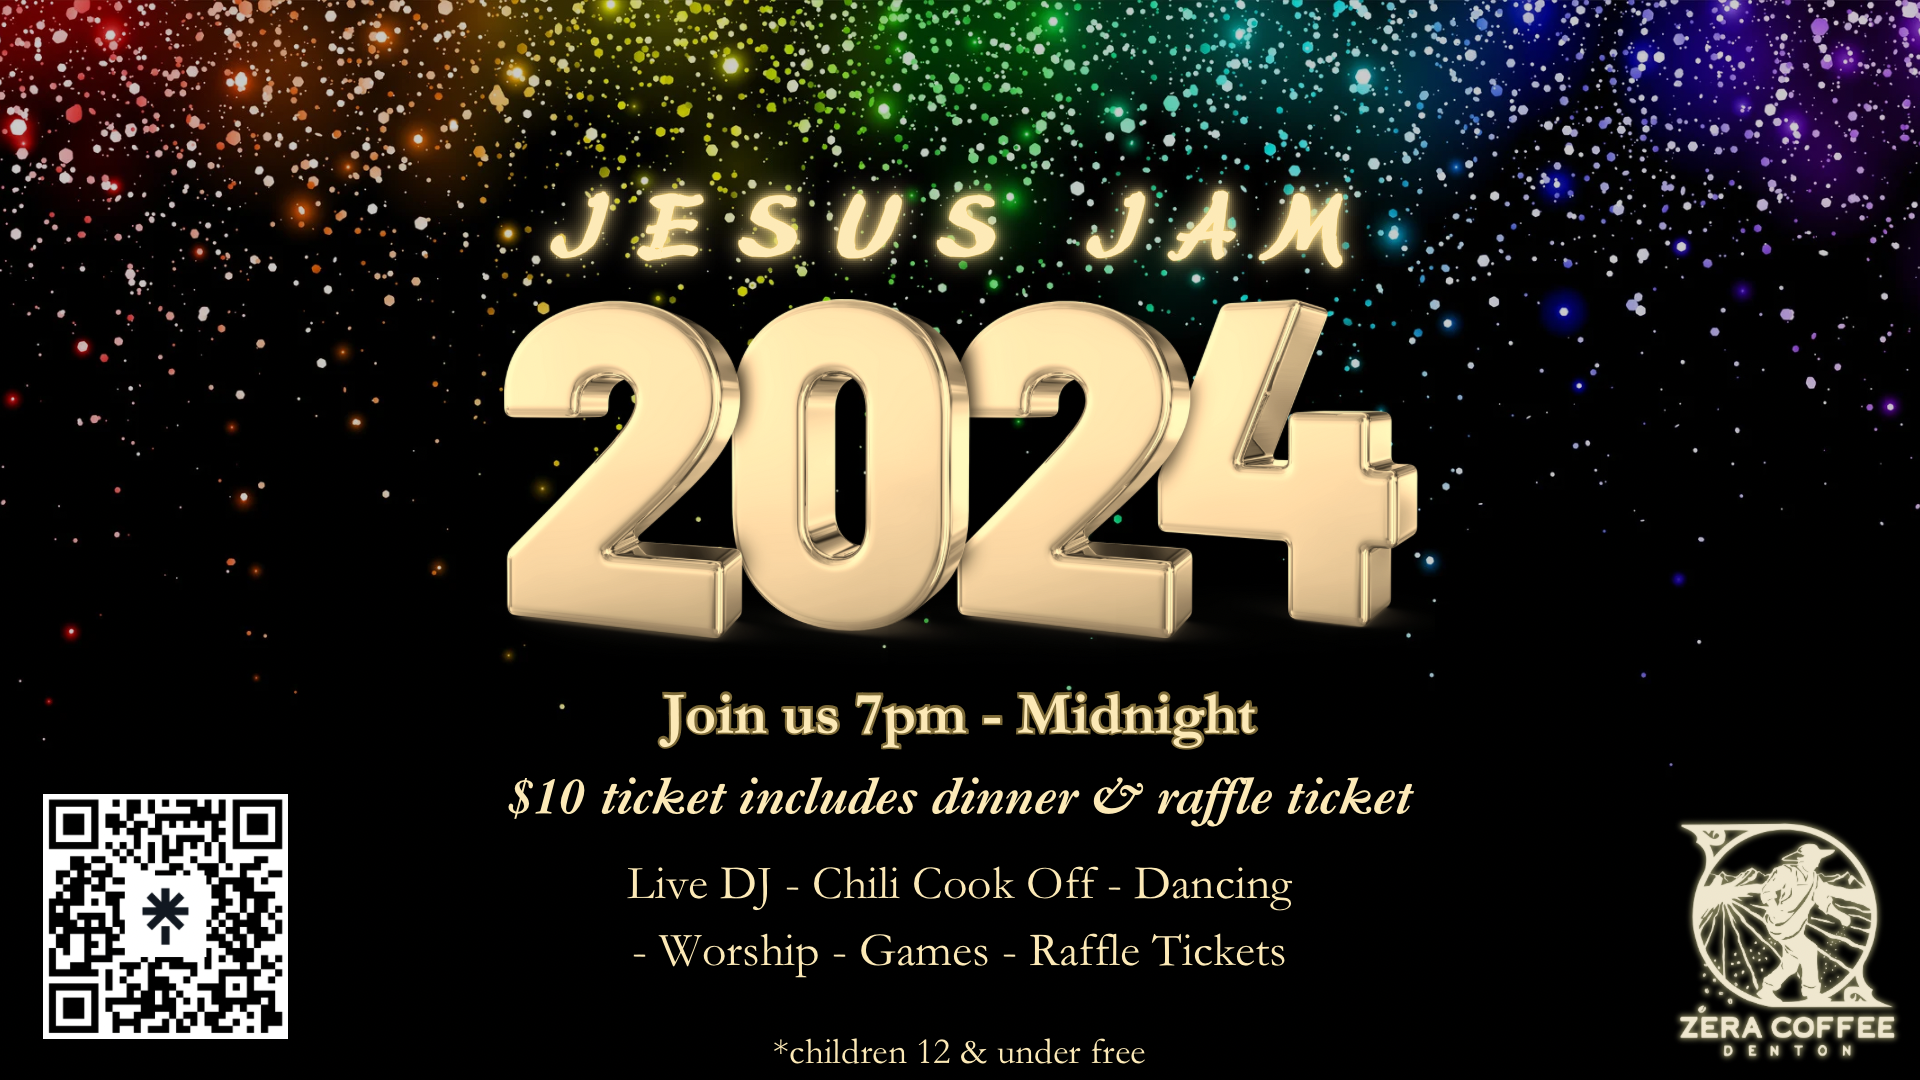 Jesus Jam New Year's Eve party